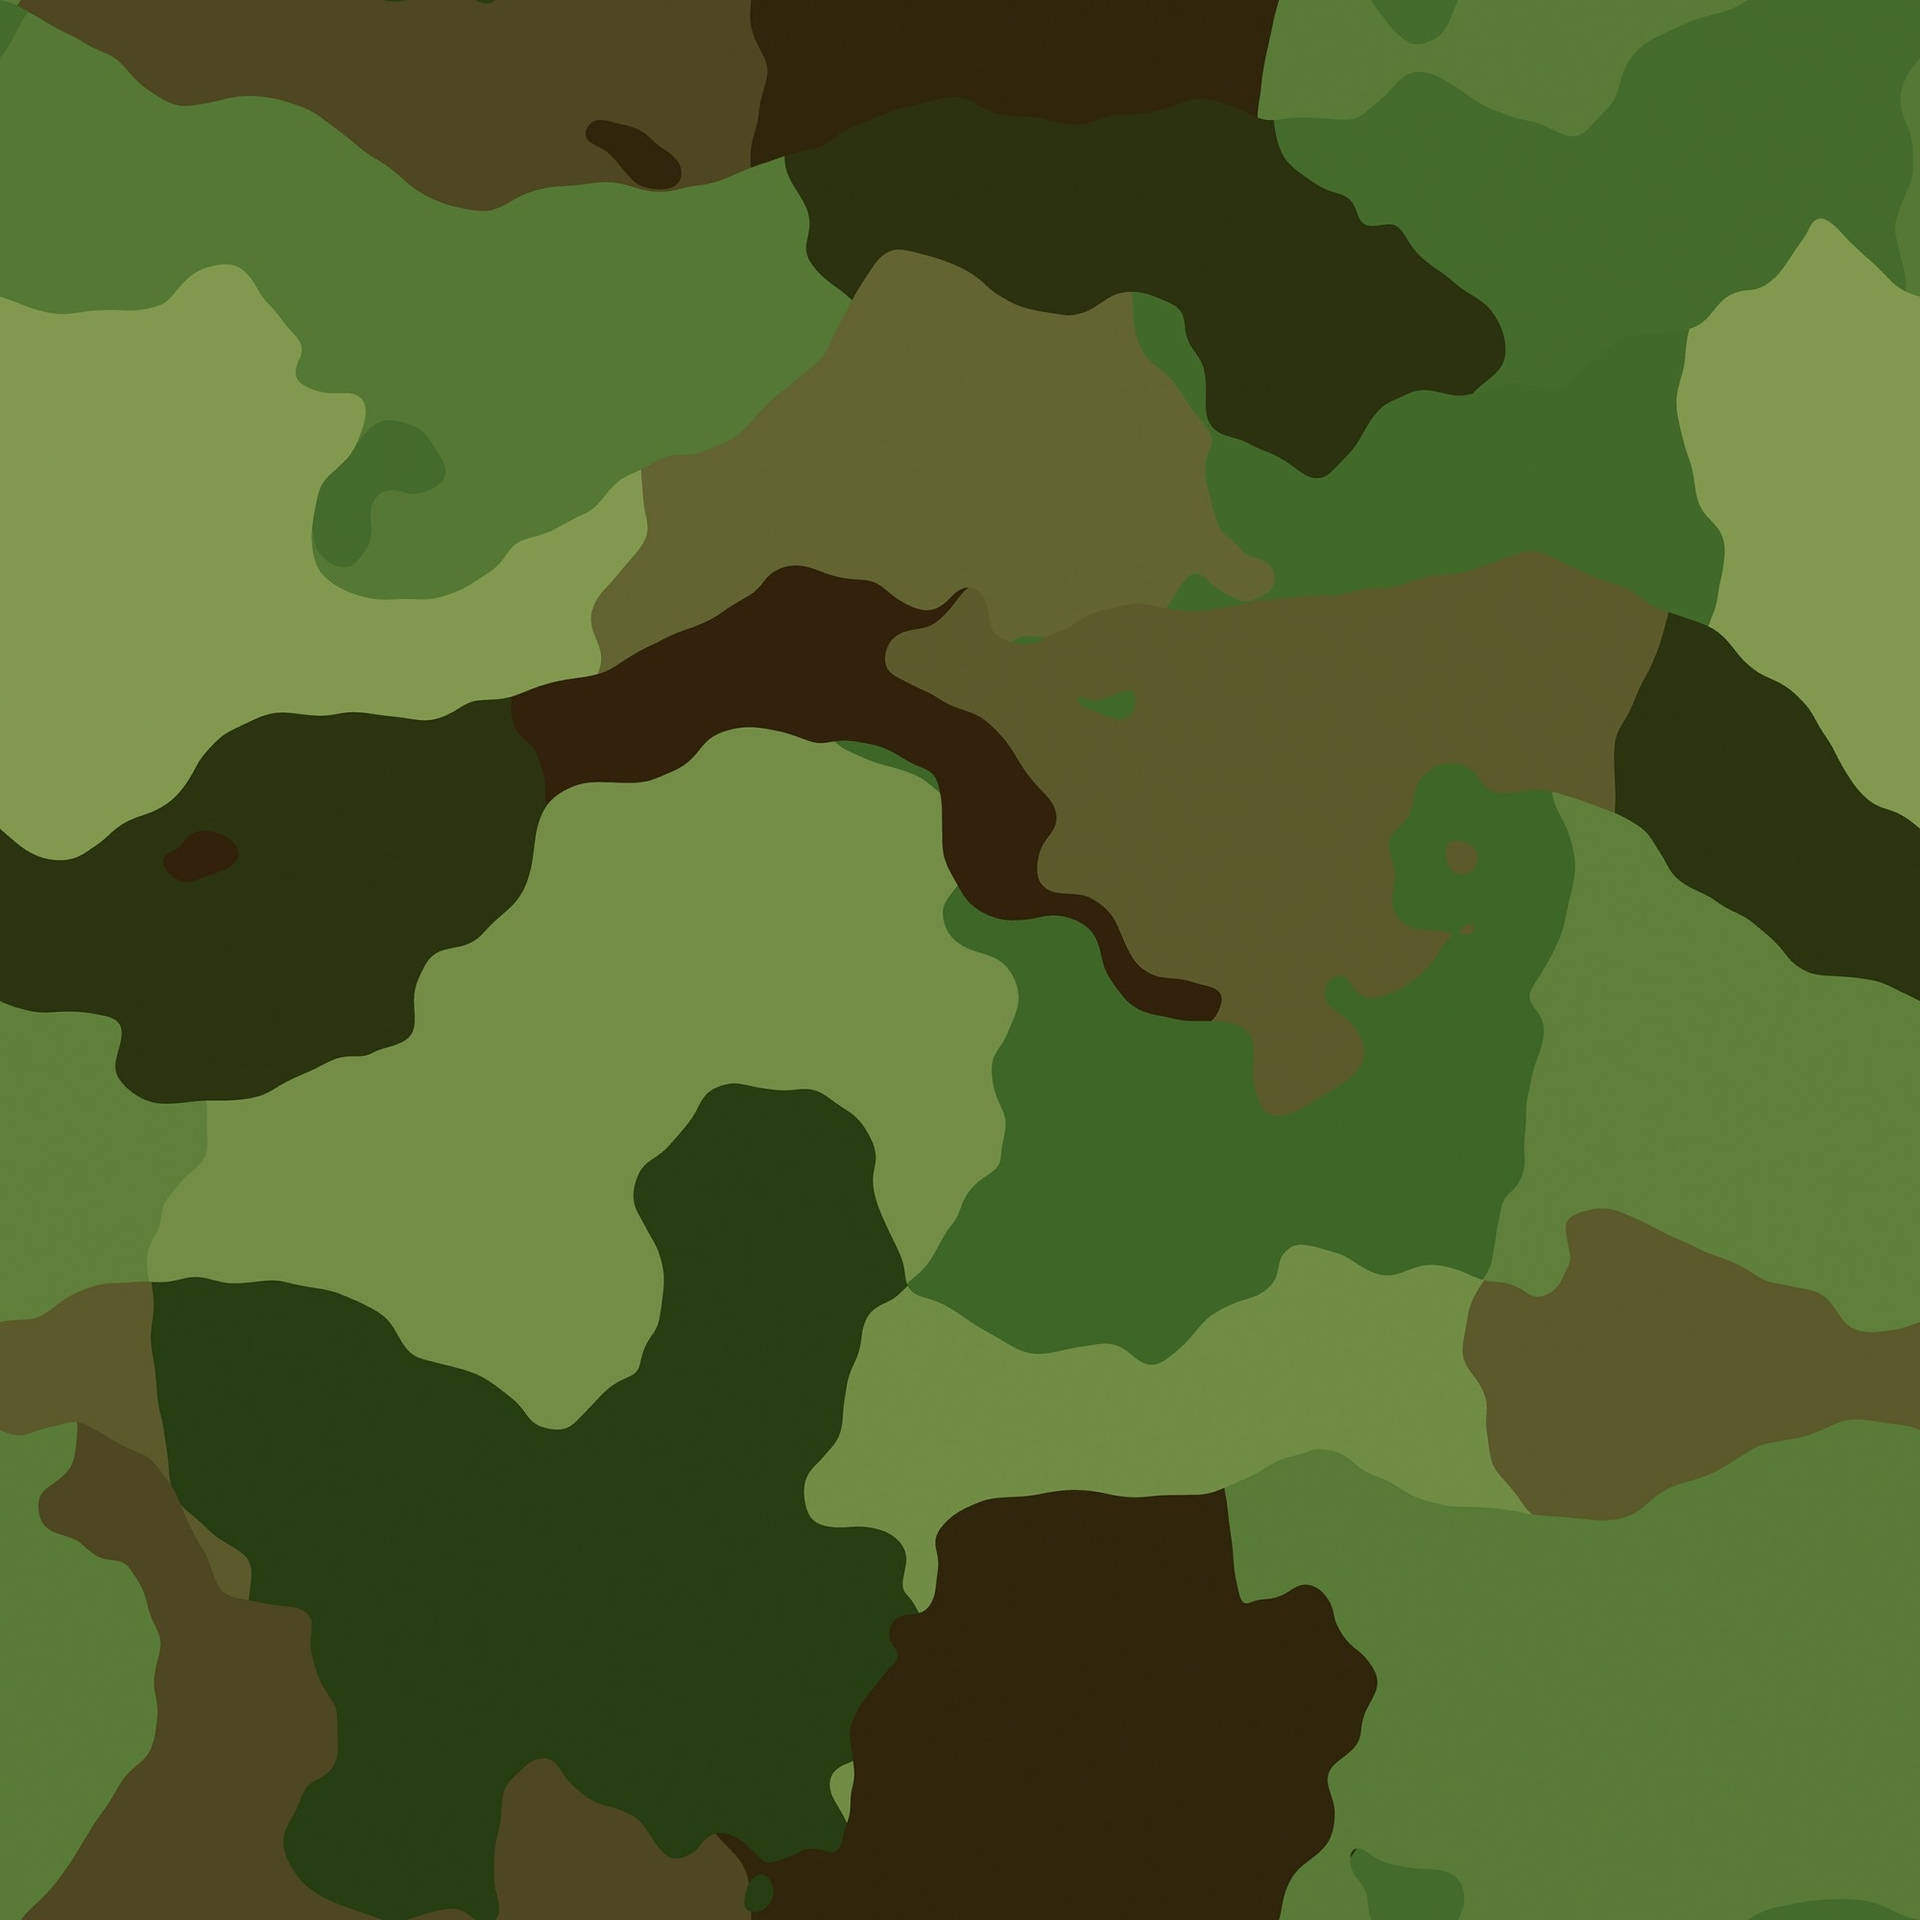 Military Wallpapers